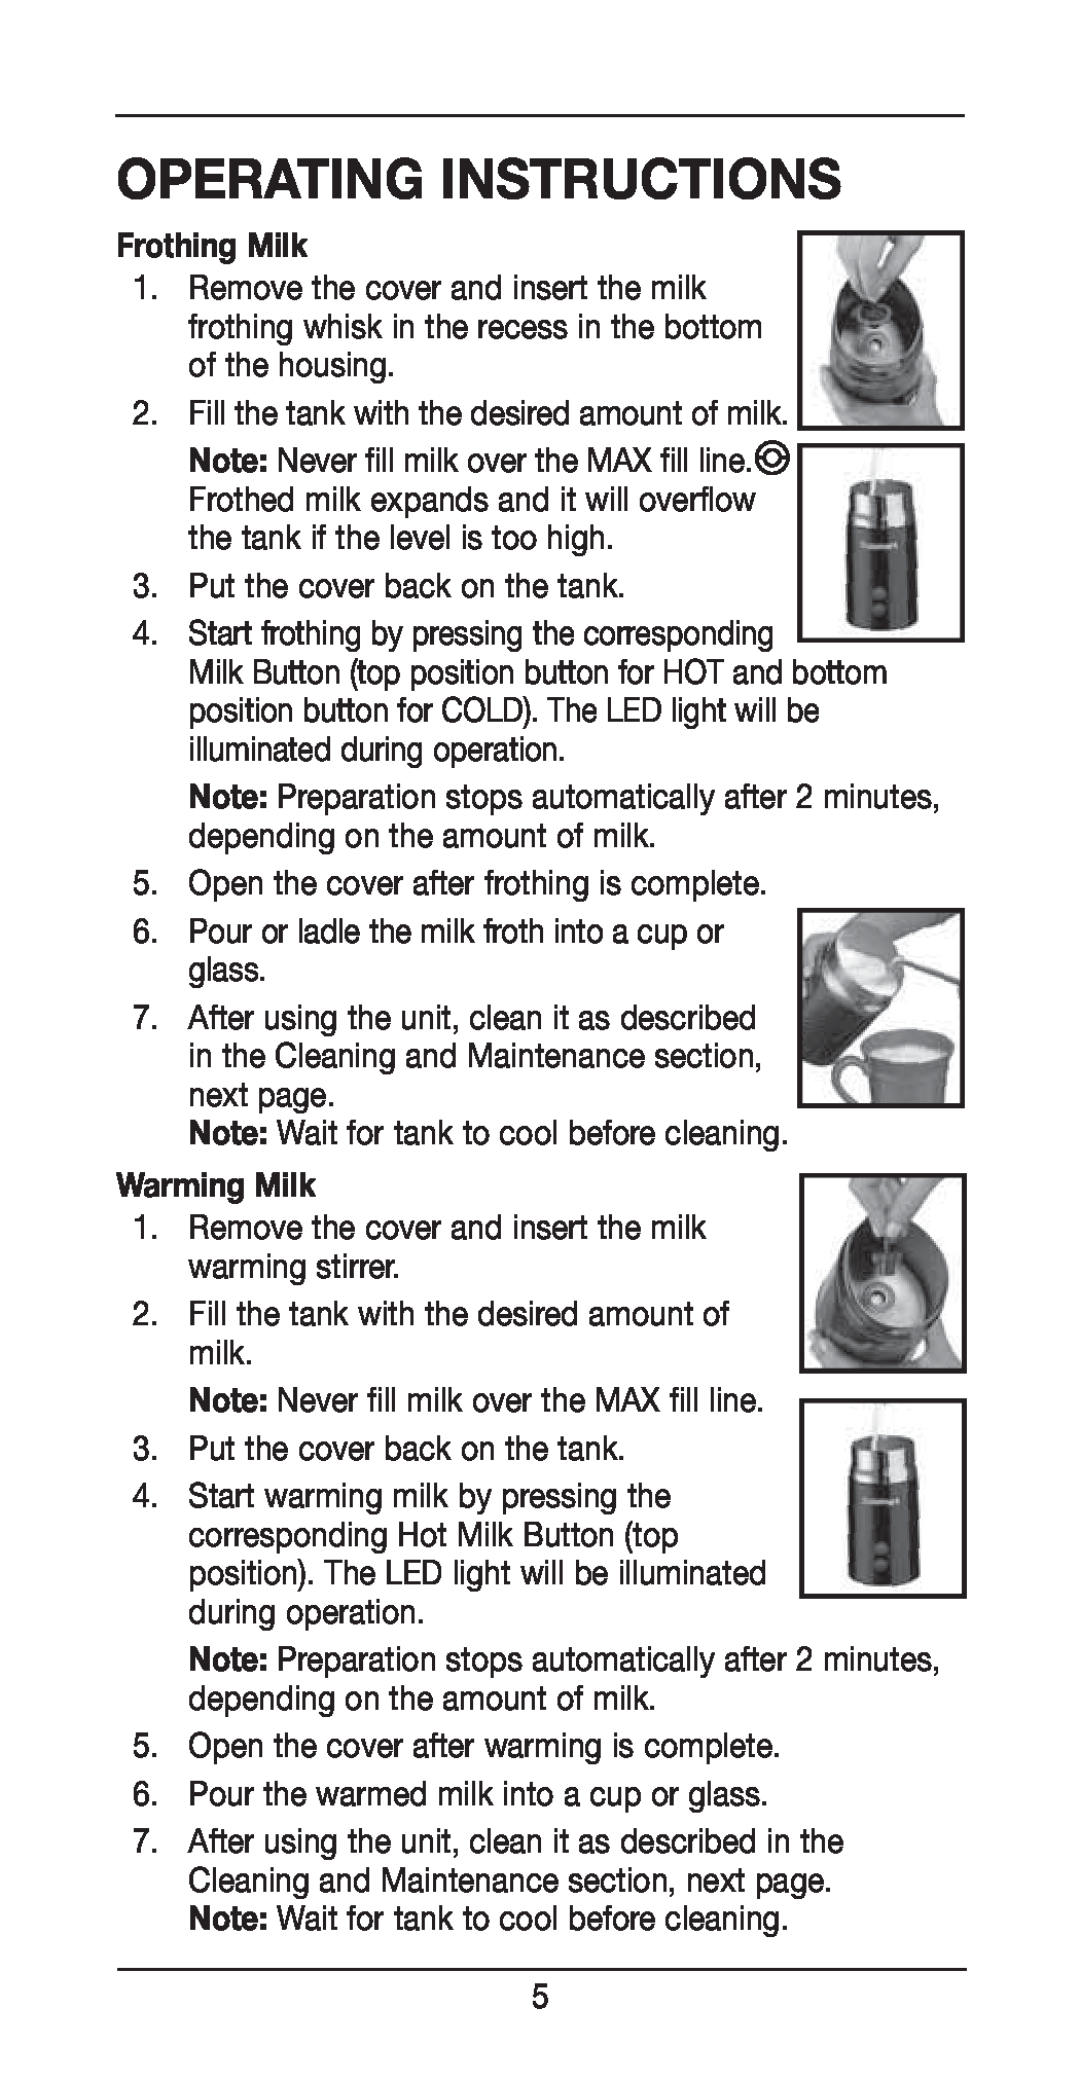 Cuisinart FR-10, Tazzaccino Milk Frother manual Operating Instructions, Frothing Milk, Warming Milk 